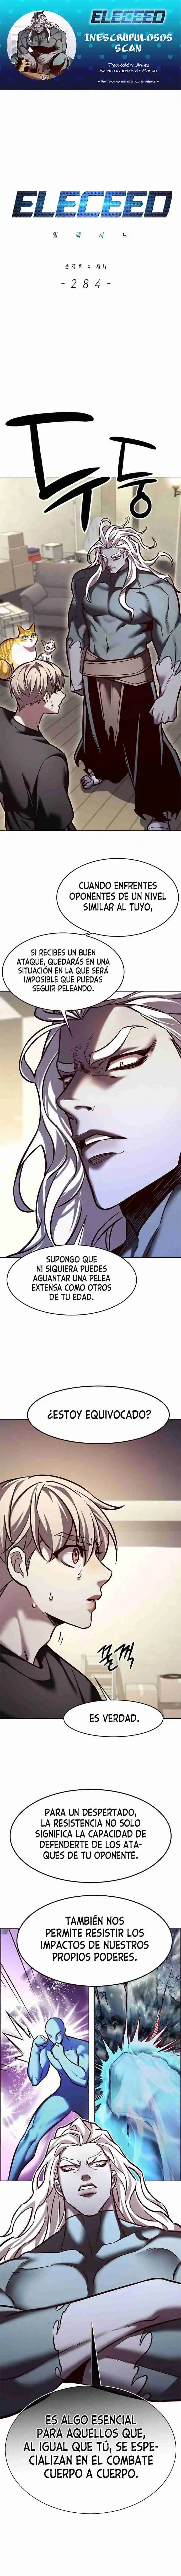 Electricidad veloz: Chapter 284 - Page 1